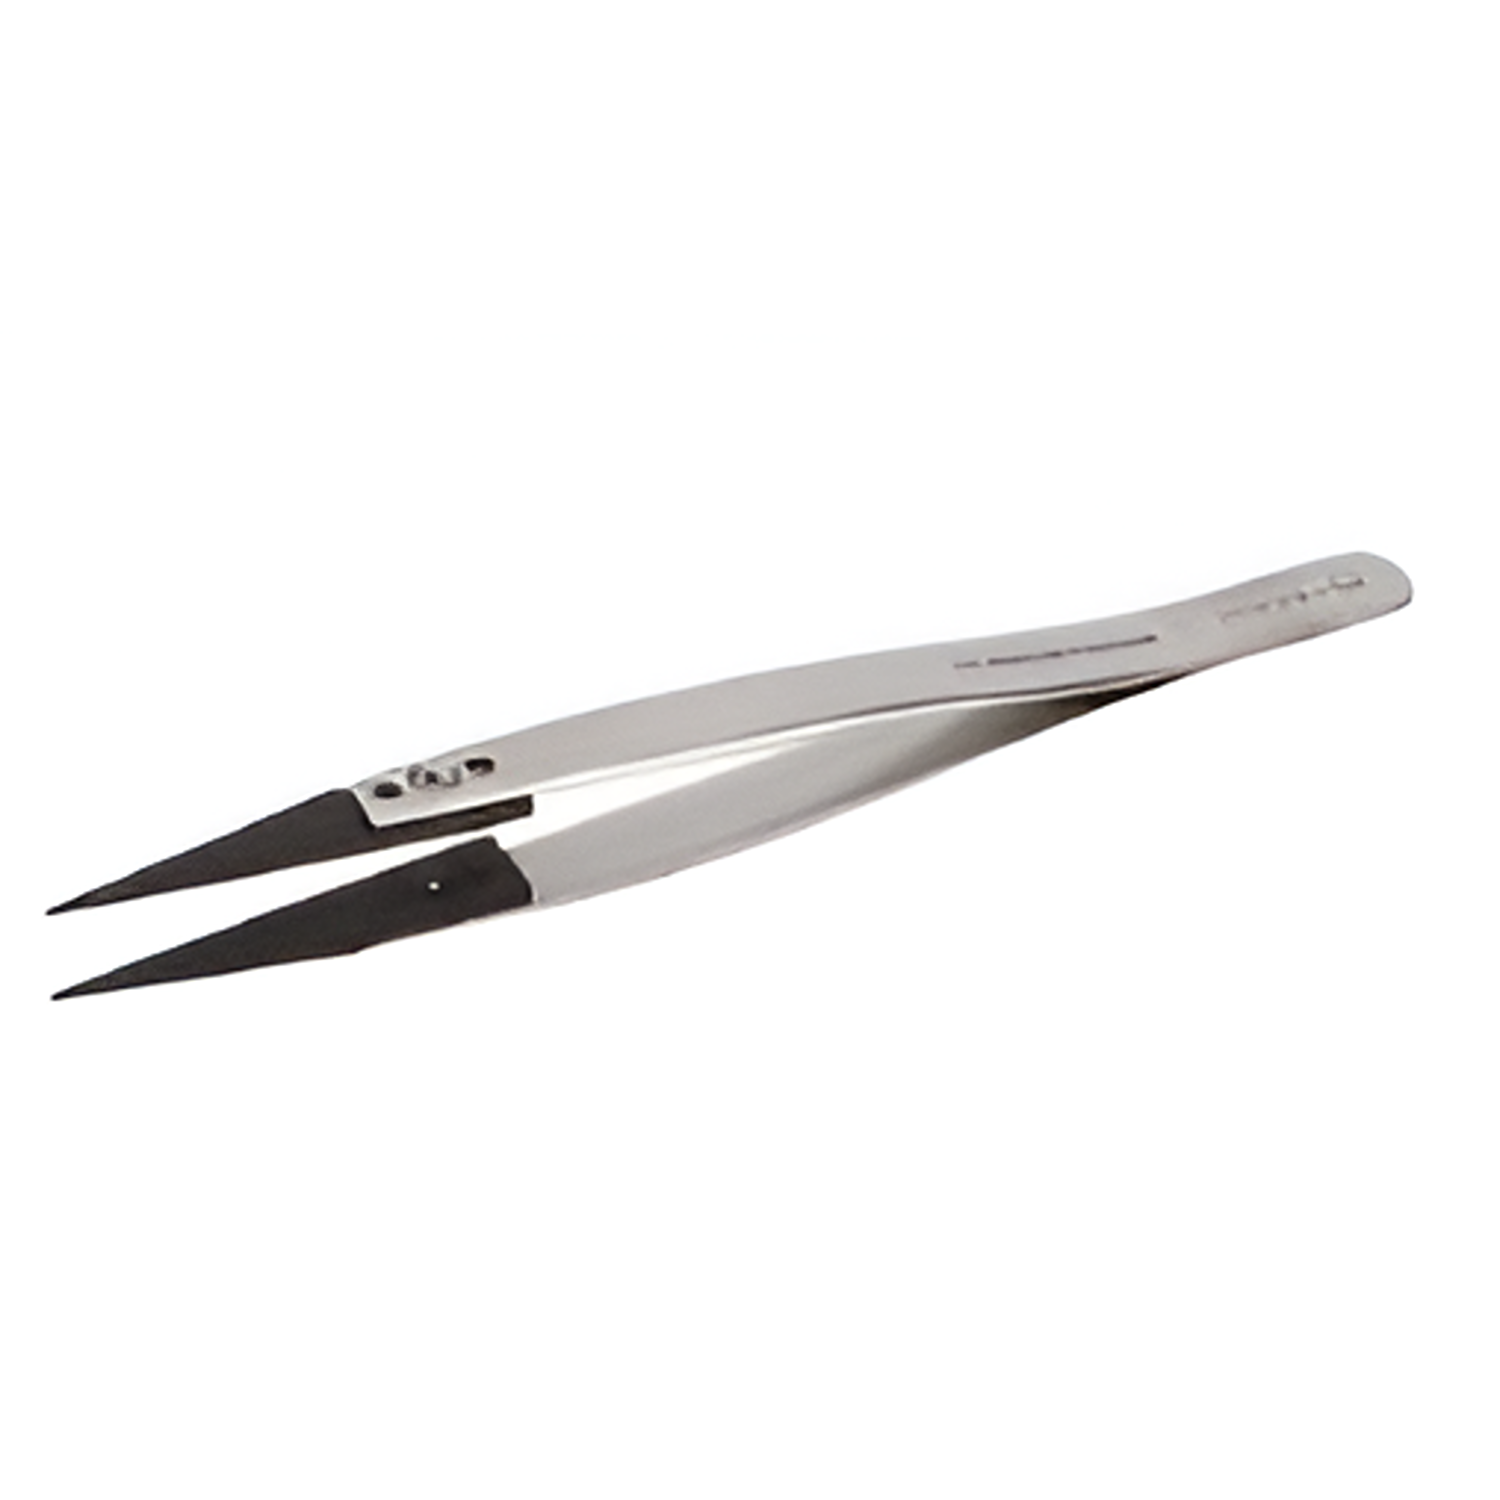 BAHCO TL 259CFR-SA Tweezers with Strong Pointed Carbon Fibre Tips - Premium Tweezers from BAHCO - Shop now at Yew Aik.